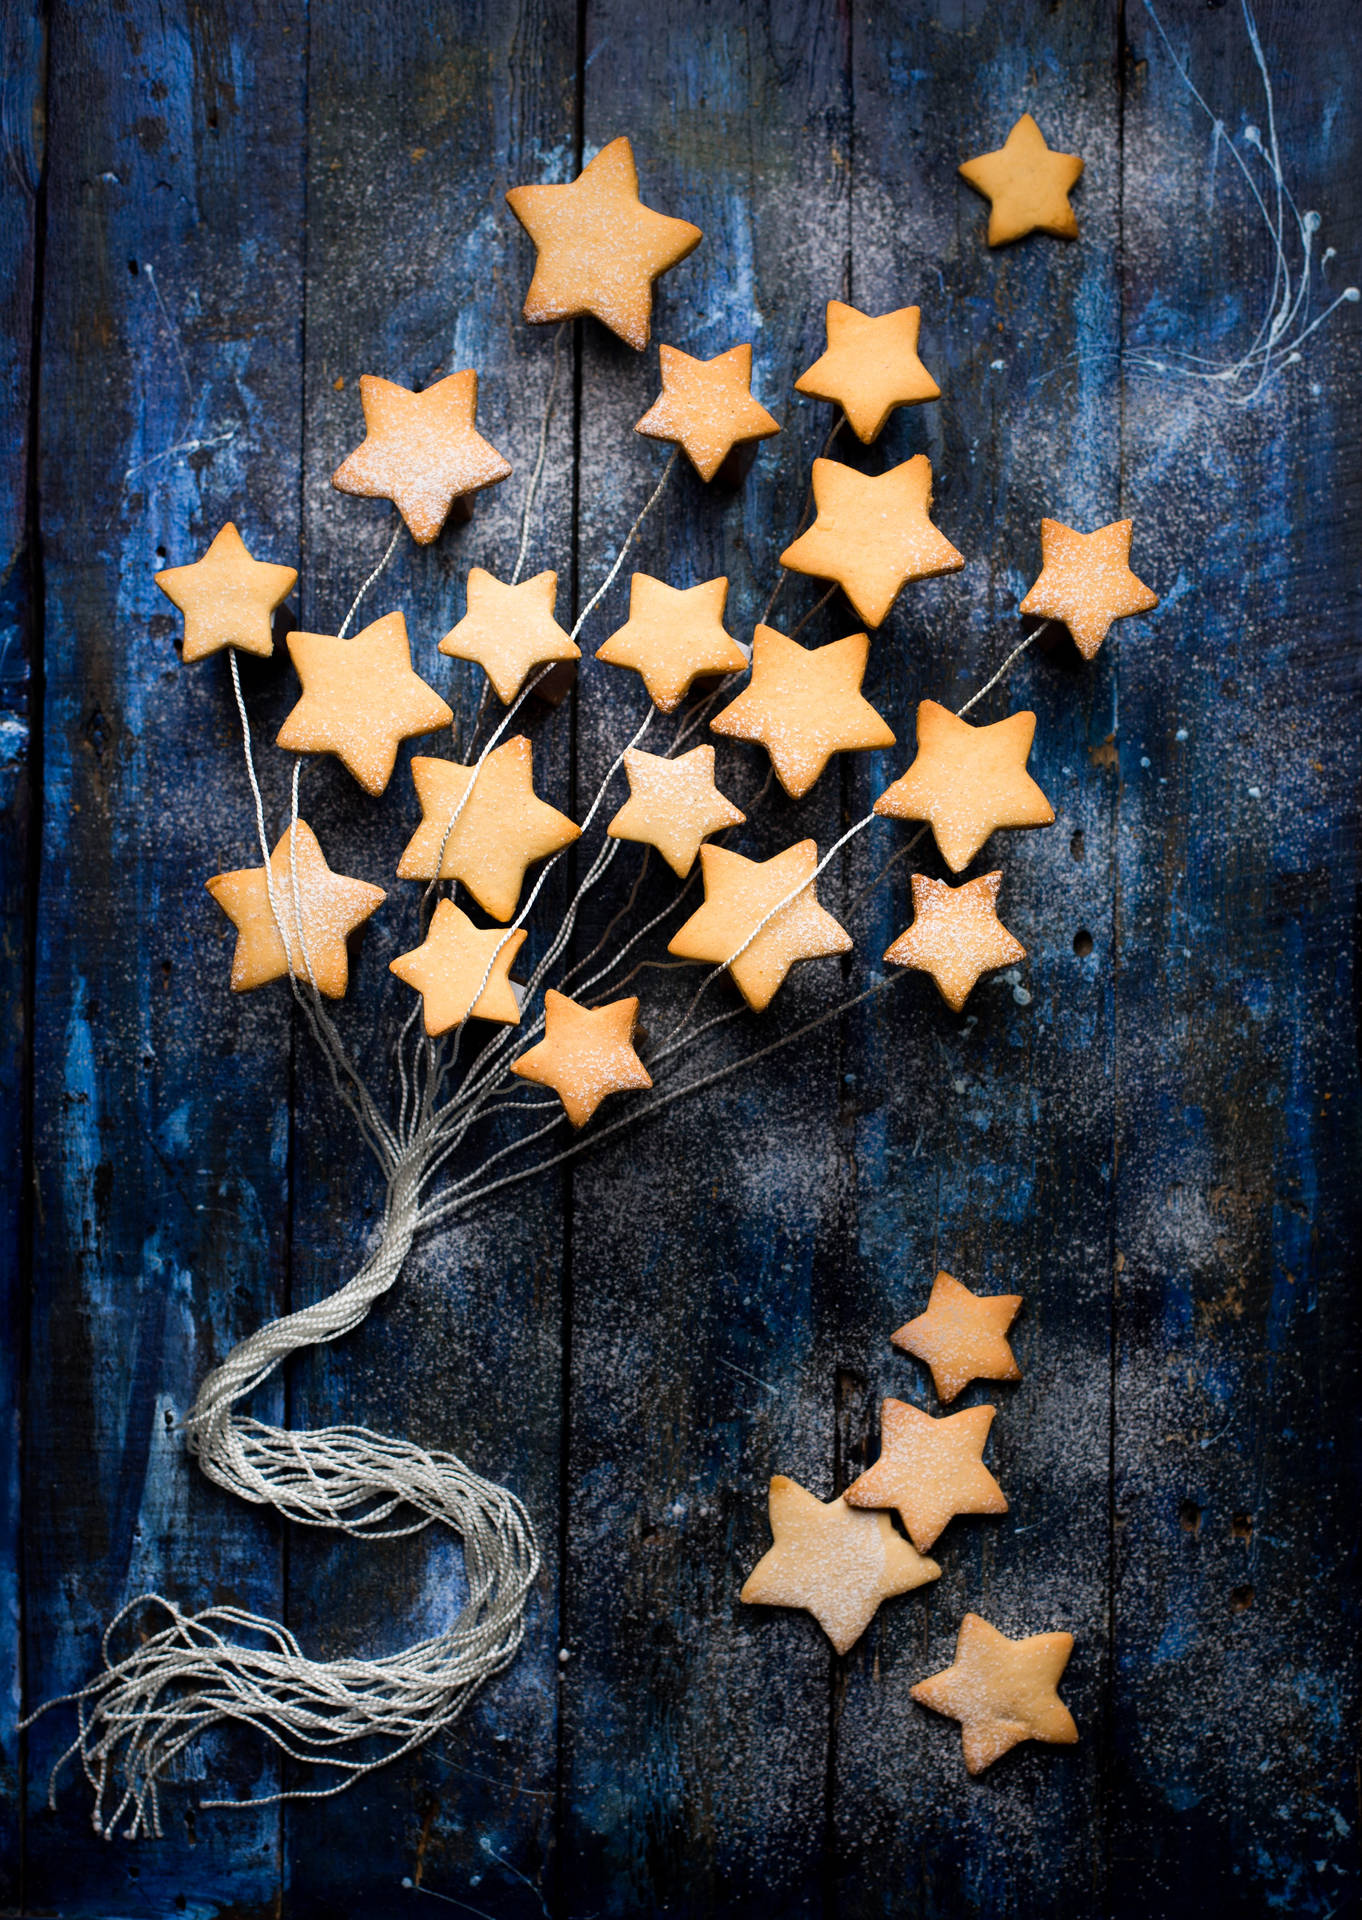 Star Shaped Cookie Wallpaper